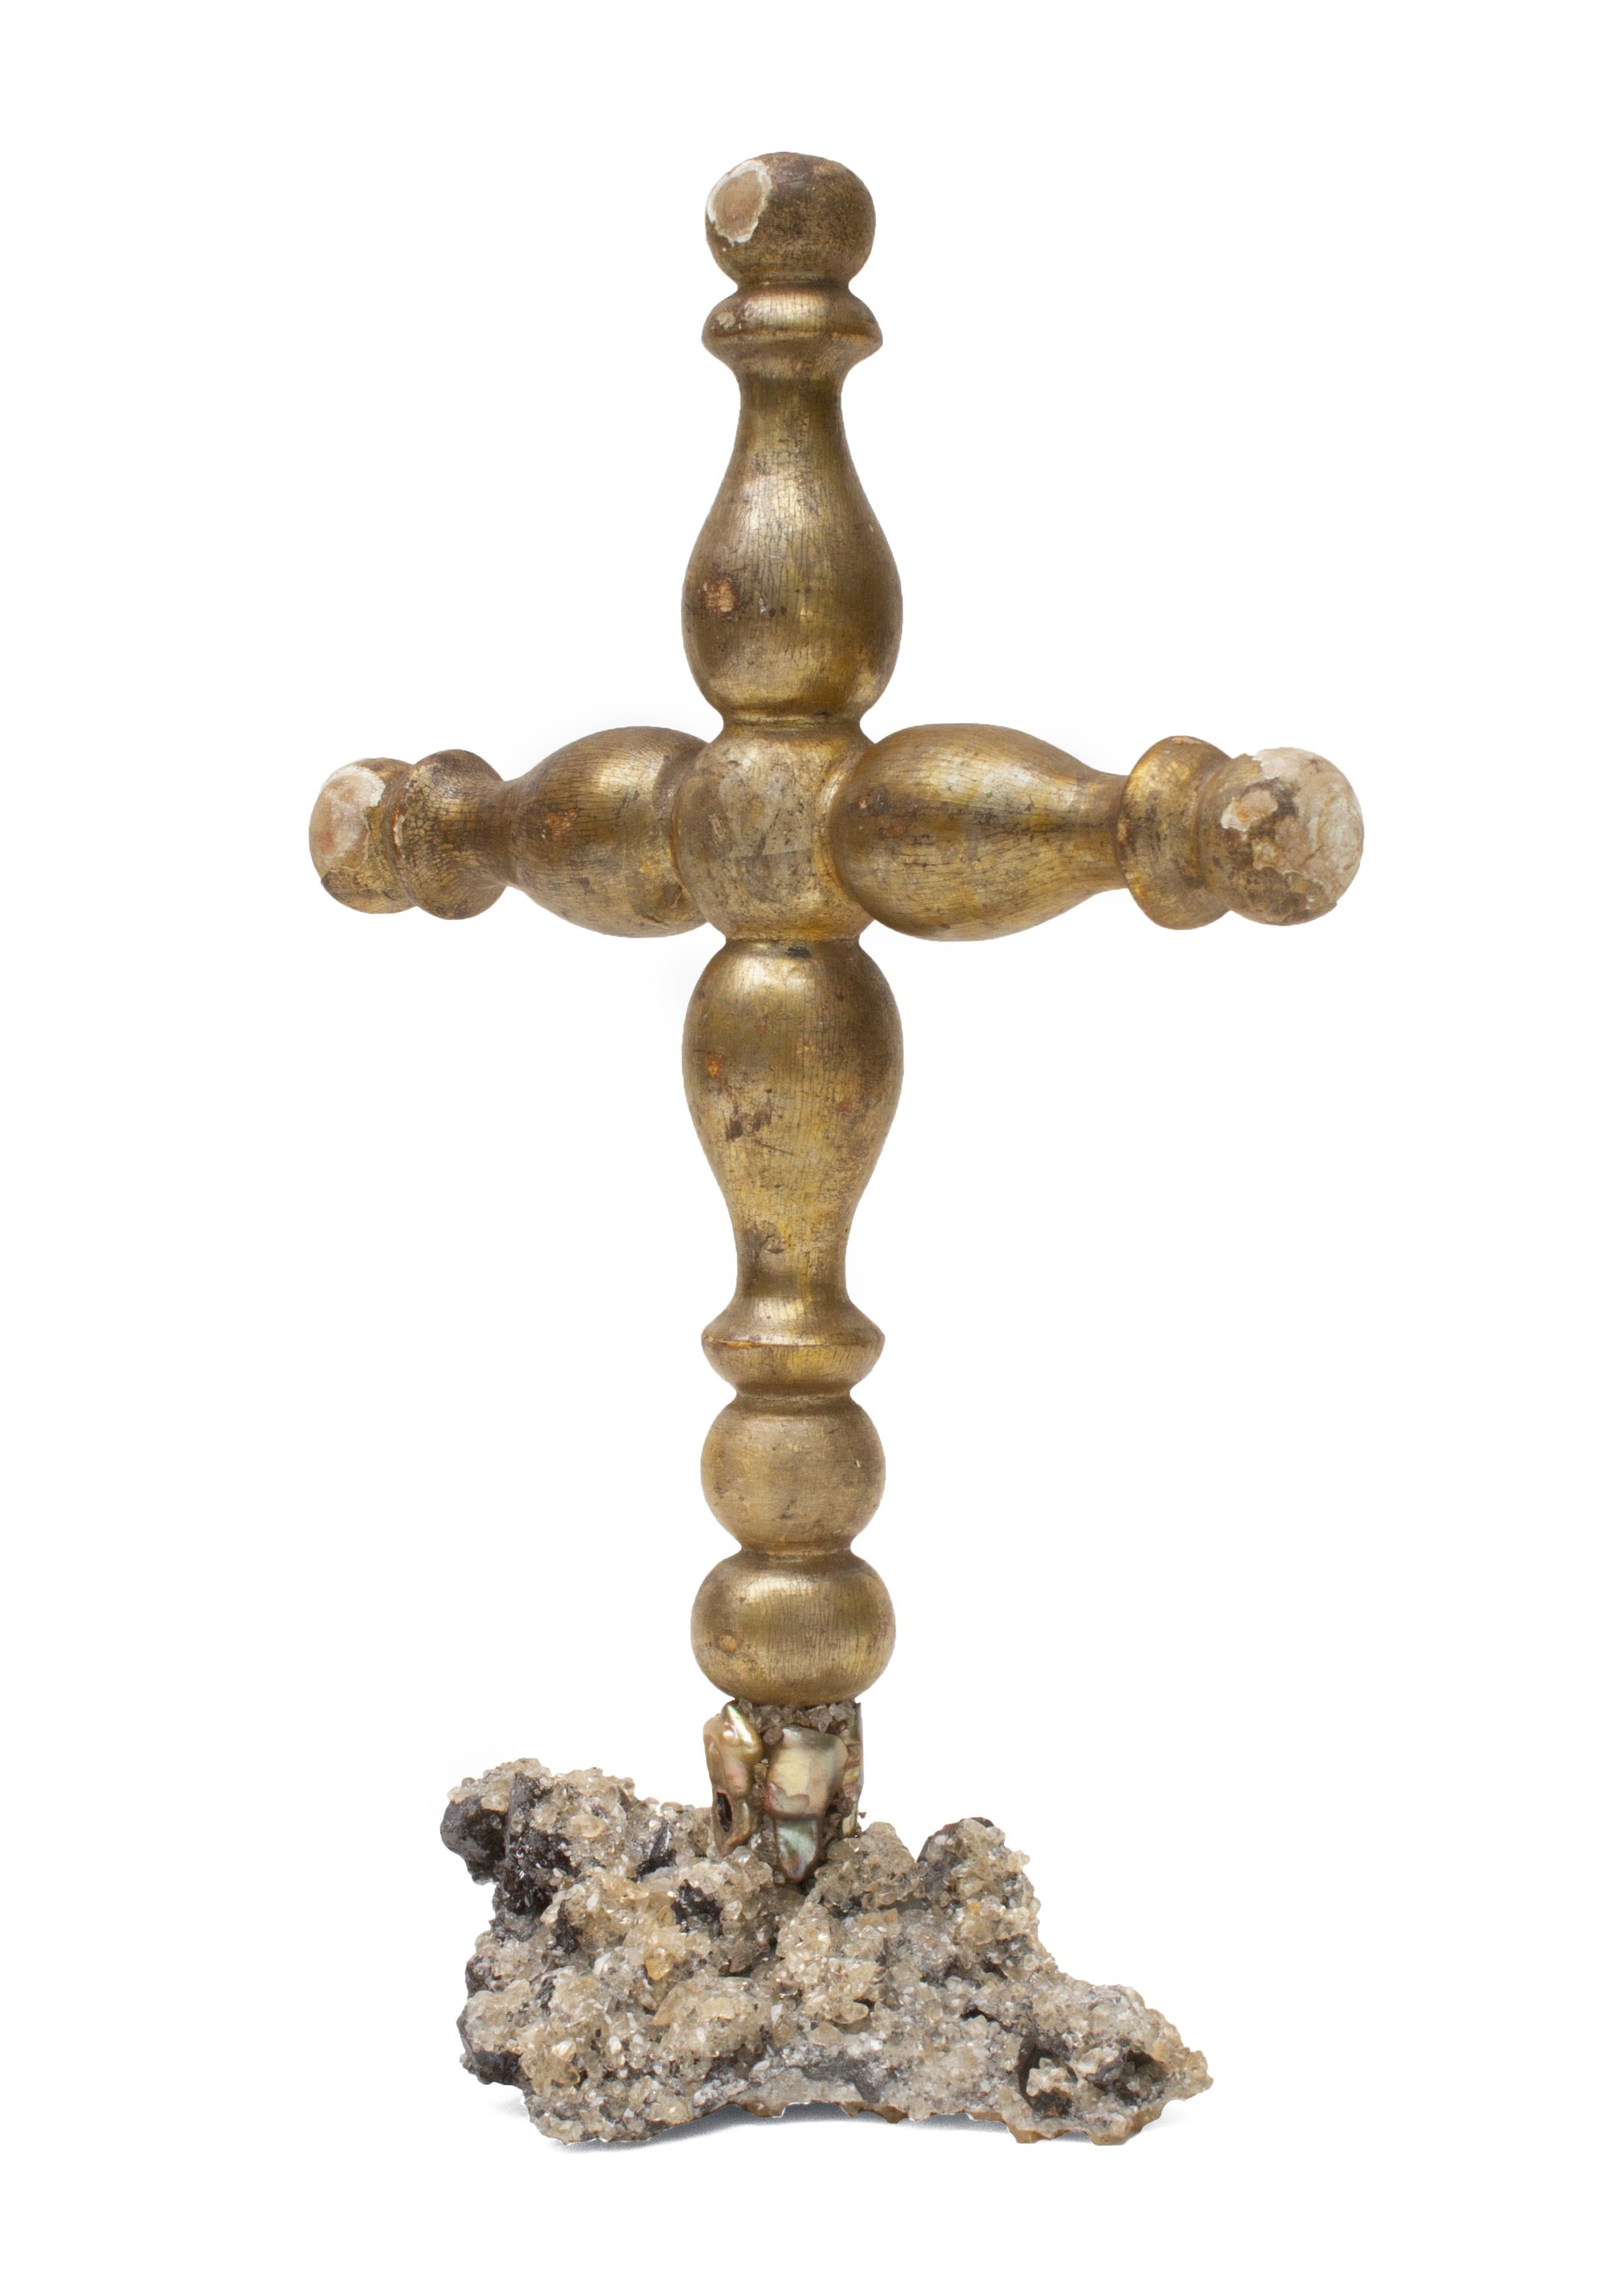 18th century Italian mecca processional cross on a calcite crystal base in matrix with coordinating baroque pearls.

The calcite crystal cluster in matrix is from Elmwood Mine in Tennessee. It is an example of the world’s finest crystallized